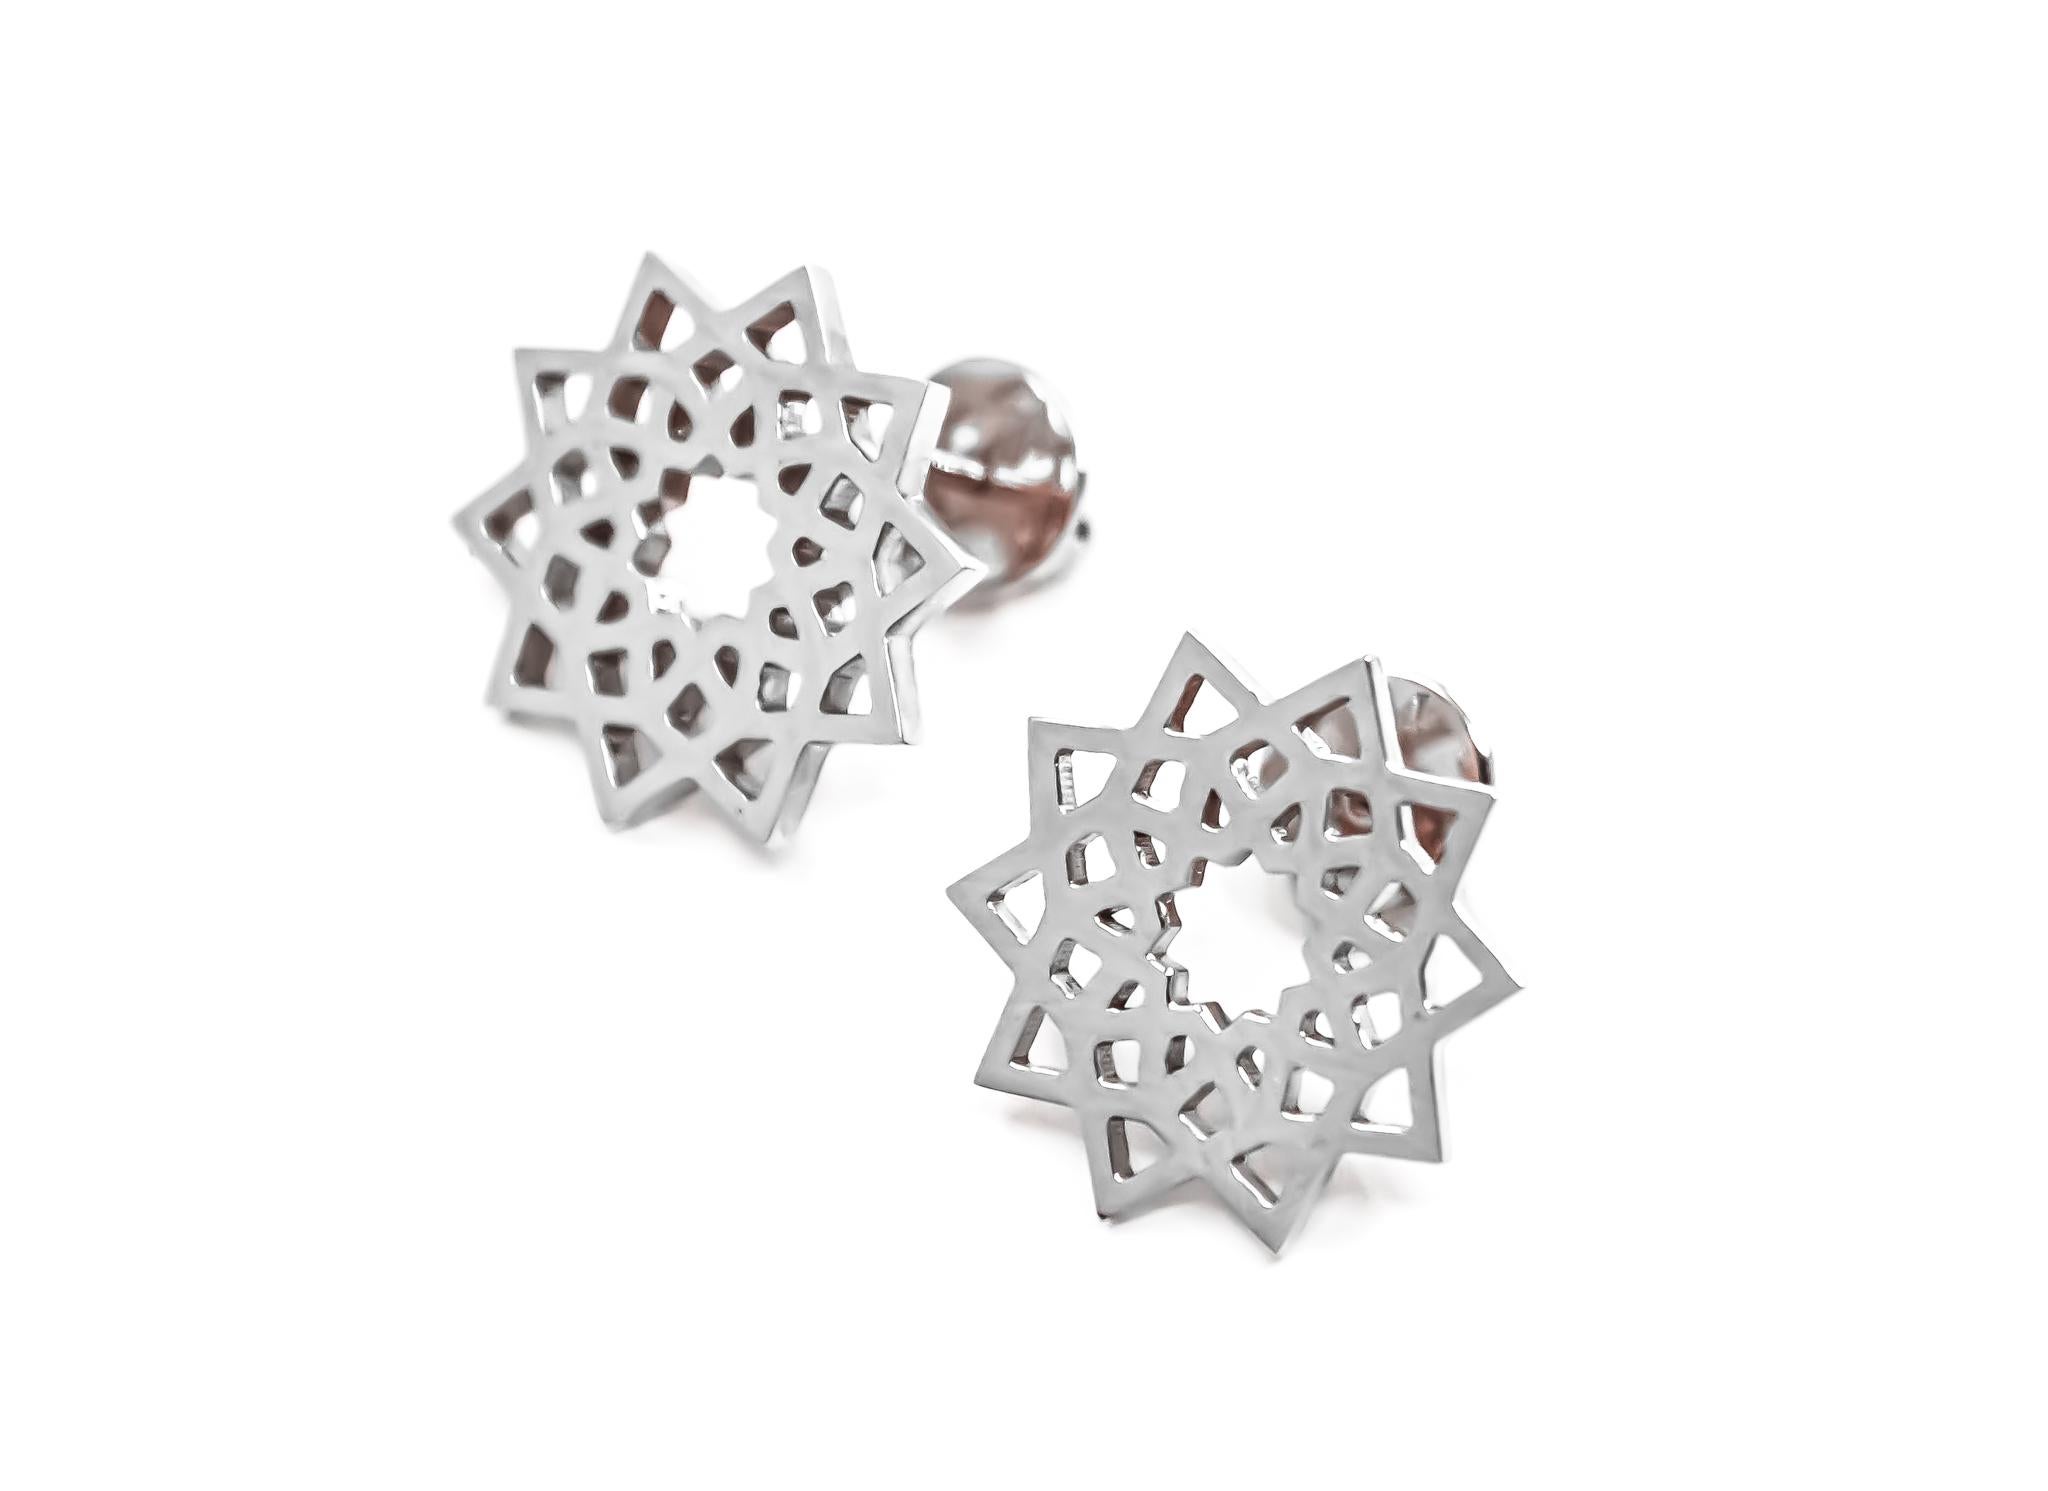 Arabesque Deco Andalusian Style Stud Earrings in 18kt White Gold

The design of the earrings is inspired by the Andalusian Style and Motifs found in Al Hambra Palace in Granada in Spain